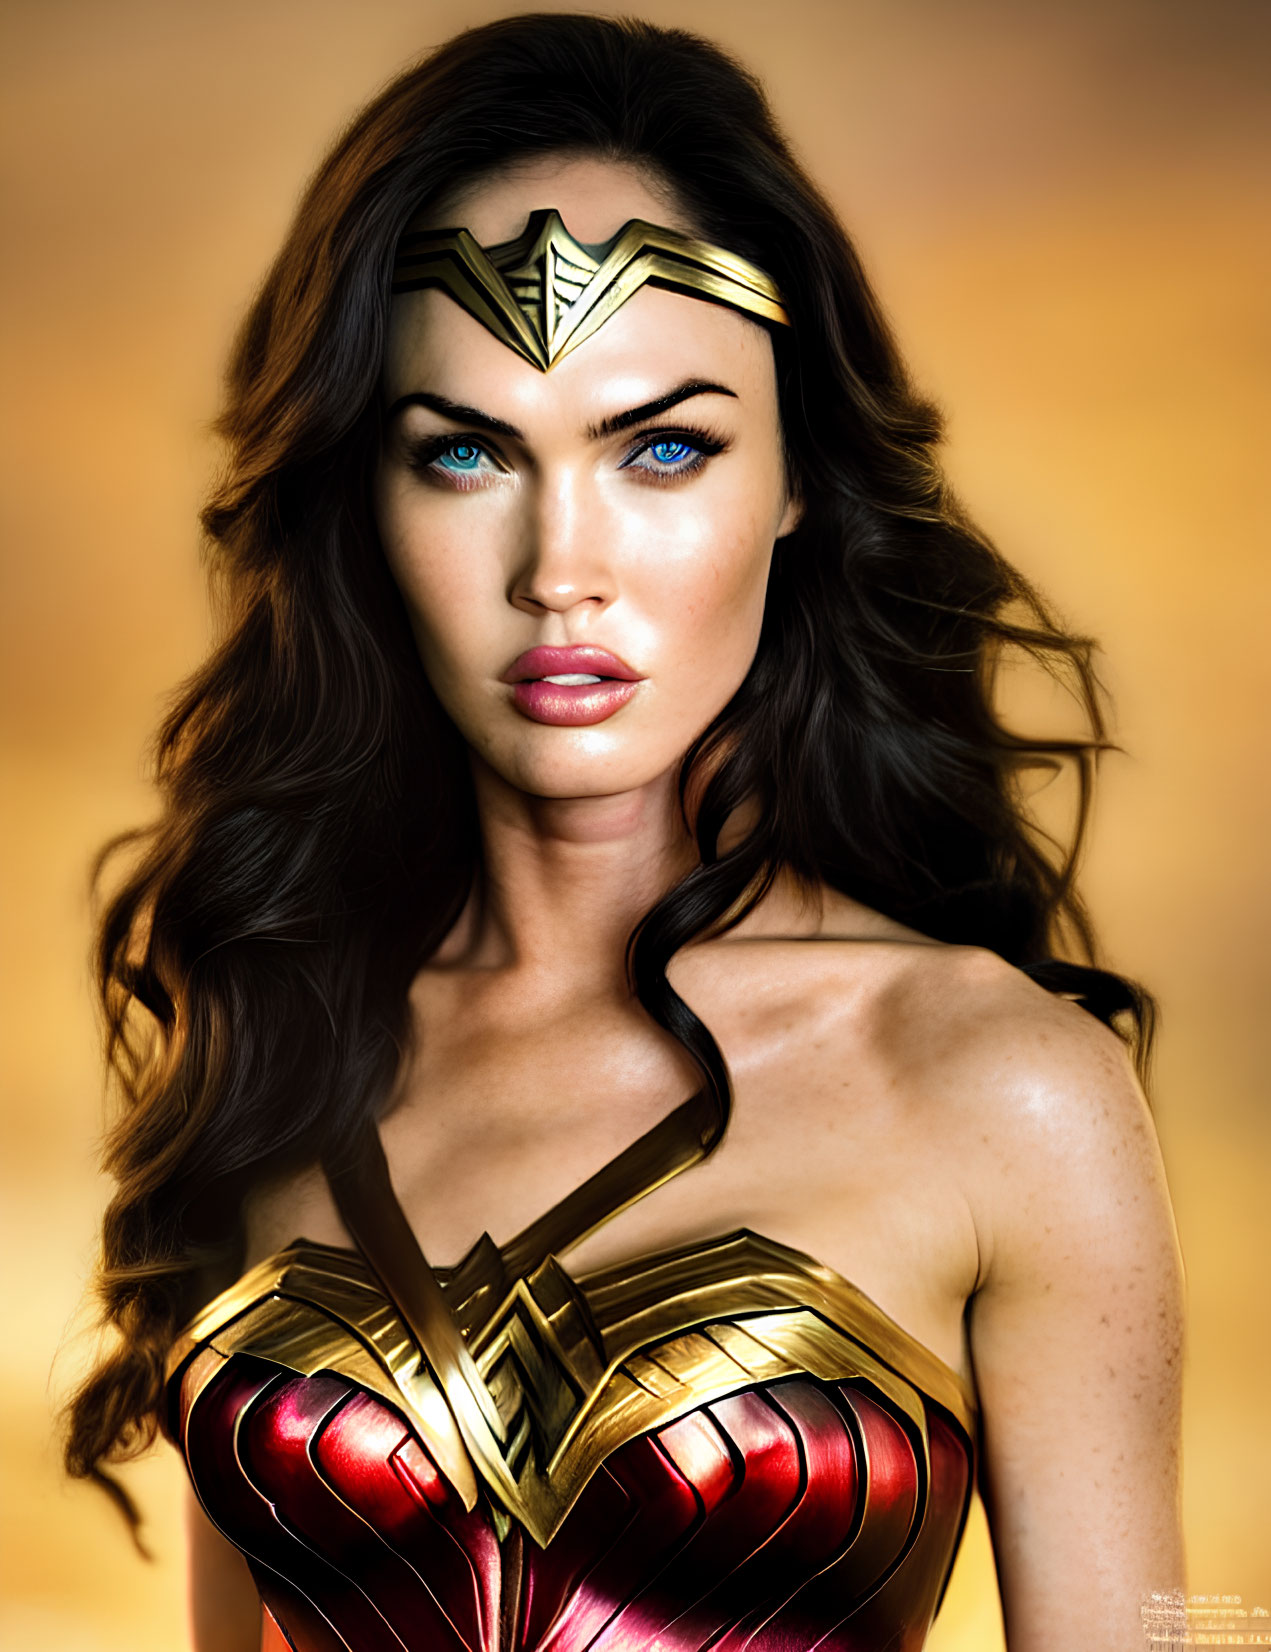 Woman in Wonder Woman costume with intense blue eyes and detailed outfit